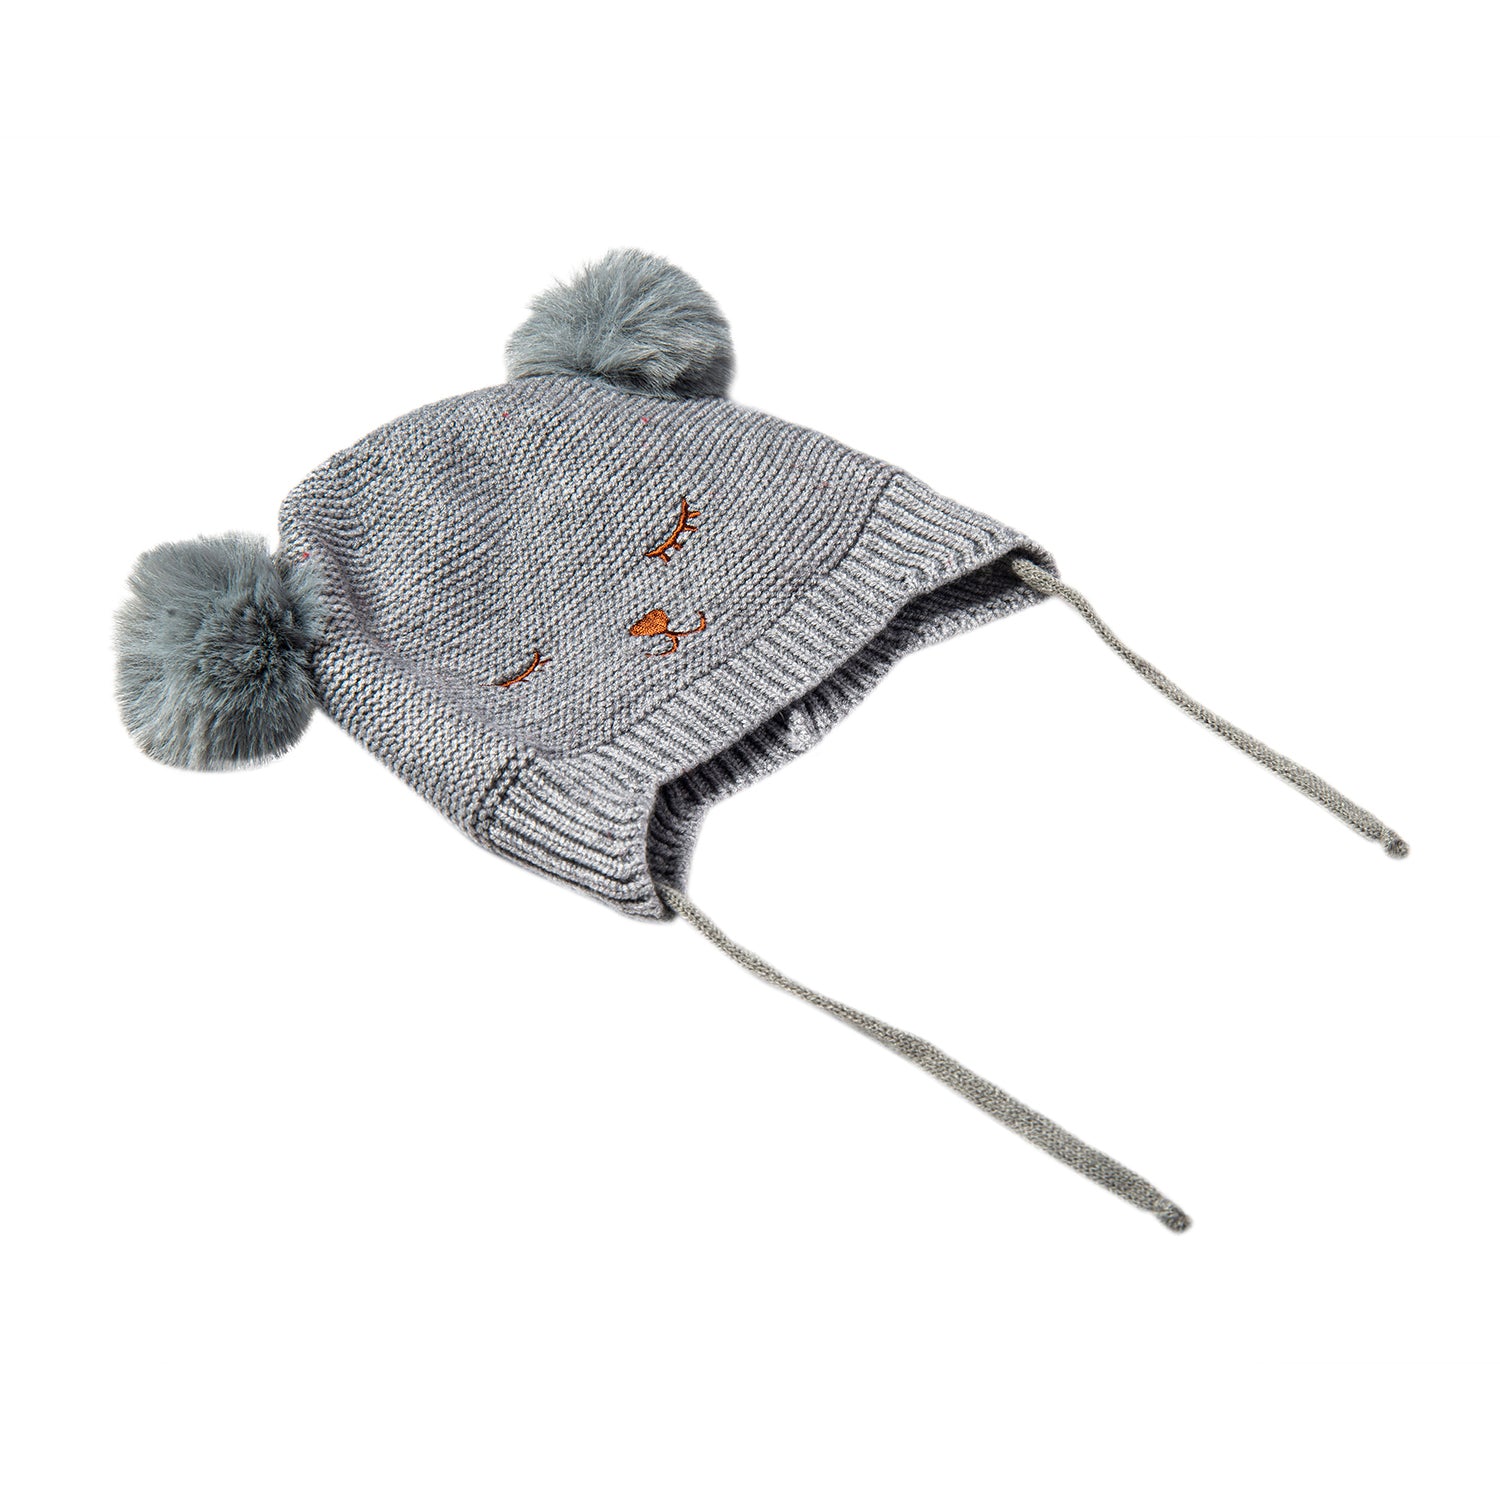 Knit Woollen Cap With Tie Knot For Ear Cover Sleeping Pom Pom Grey